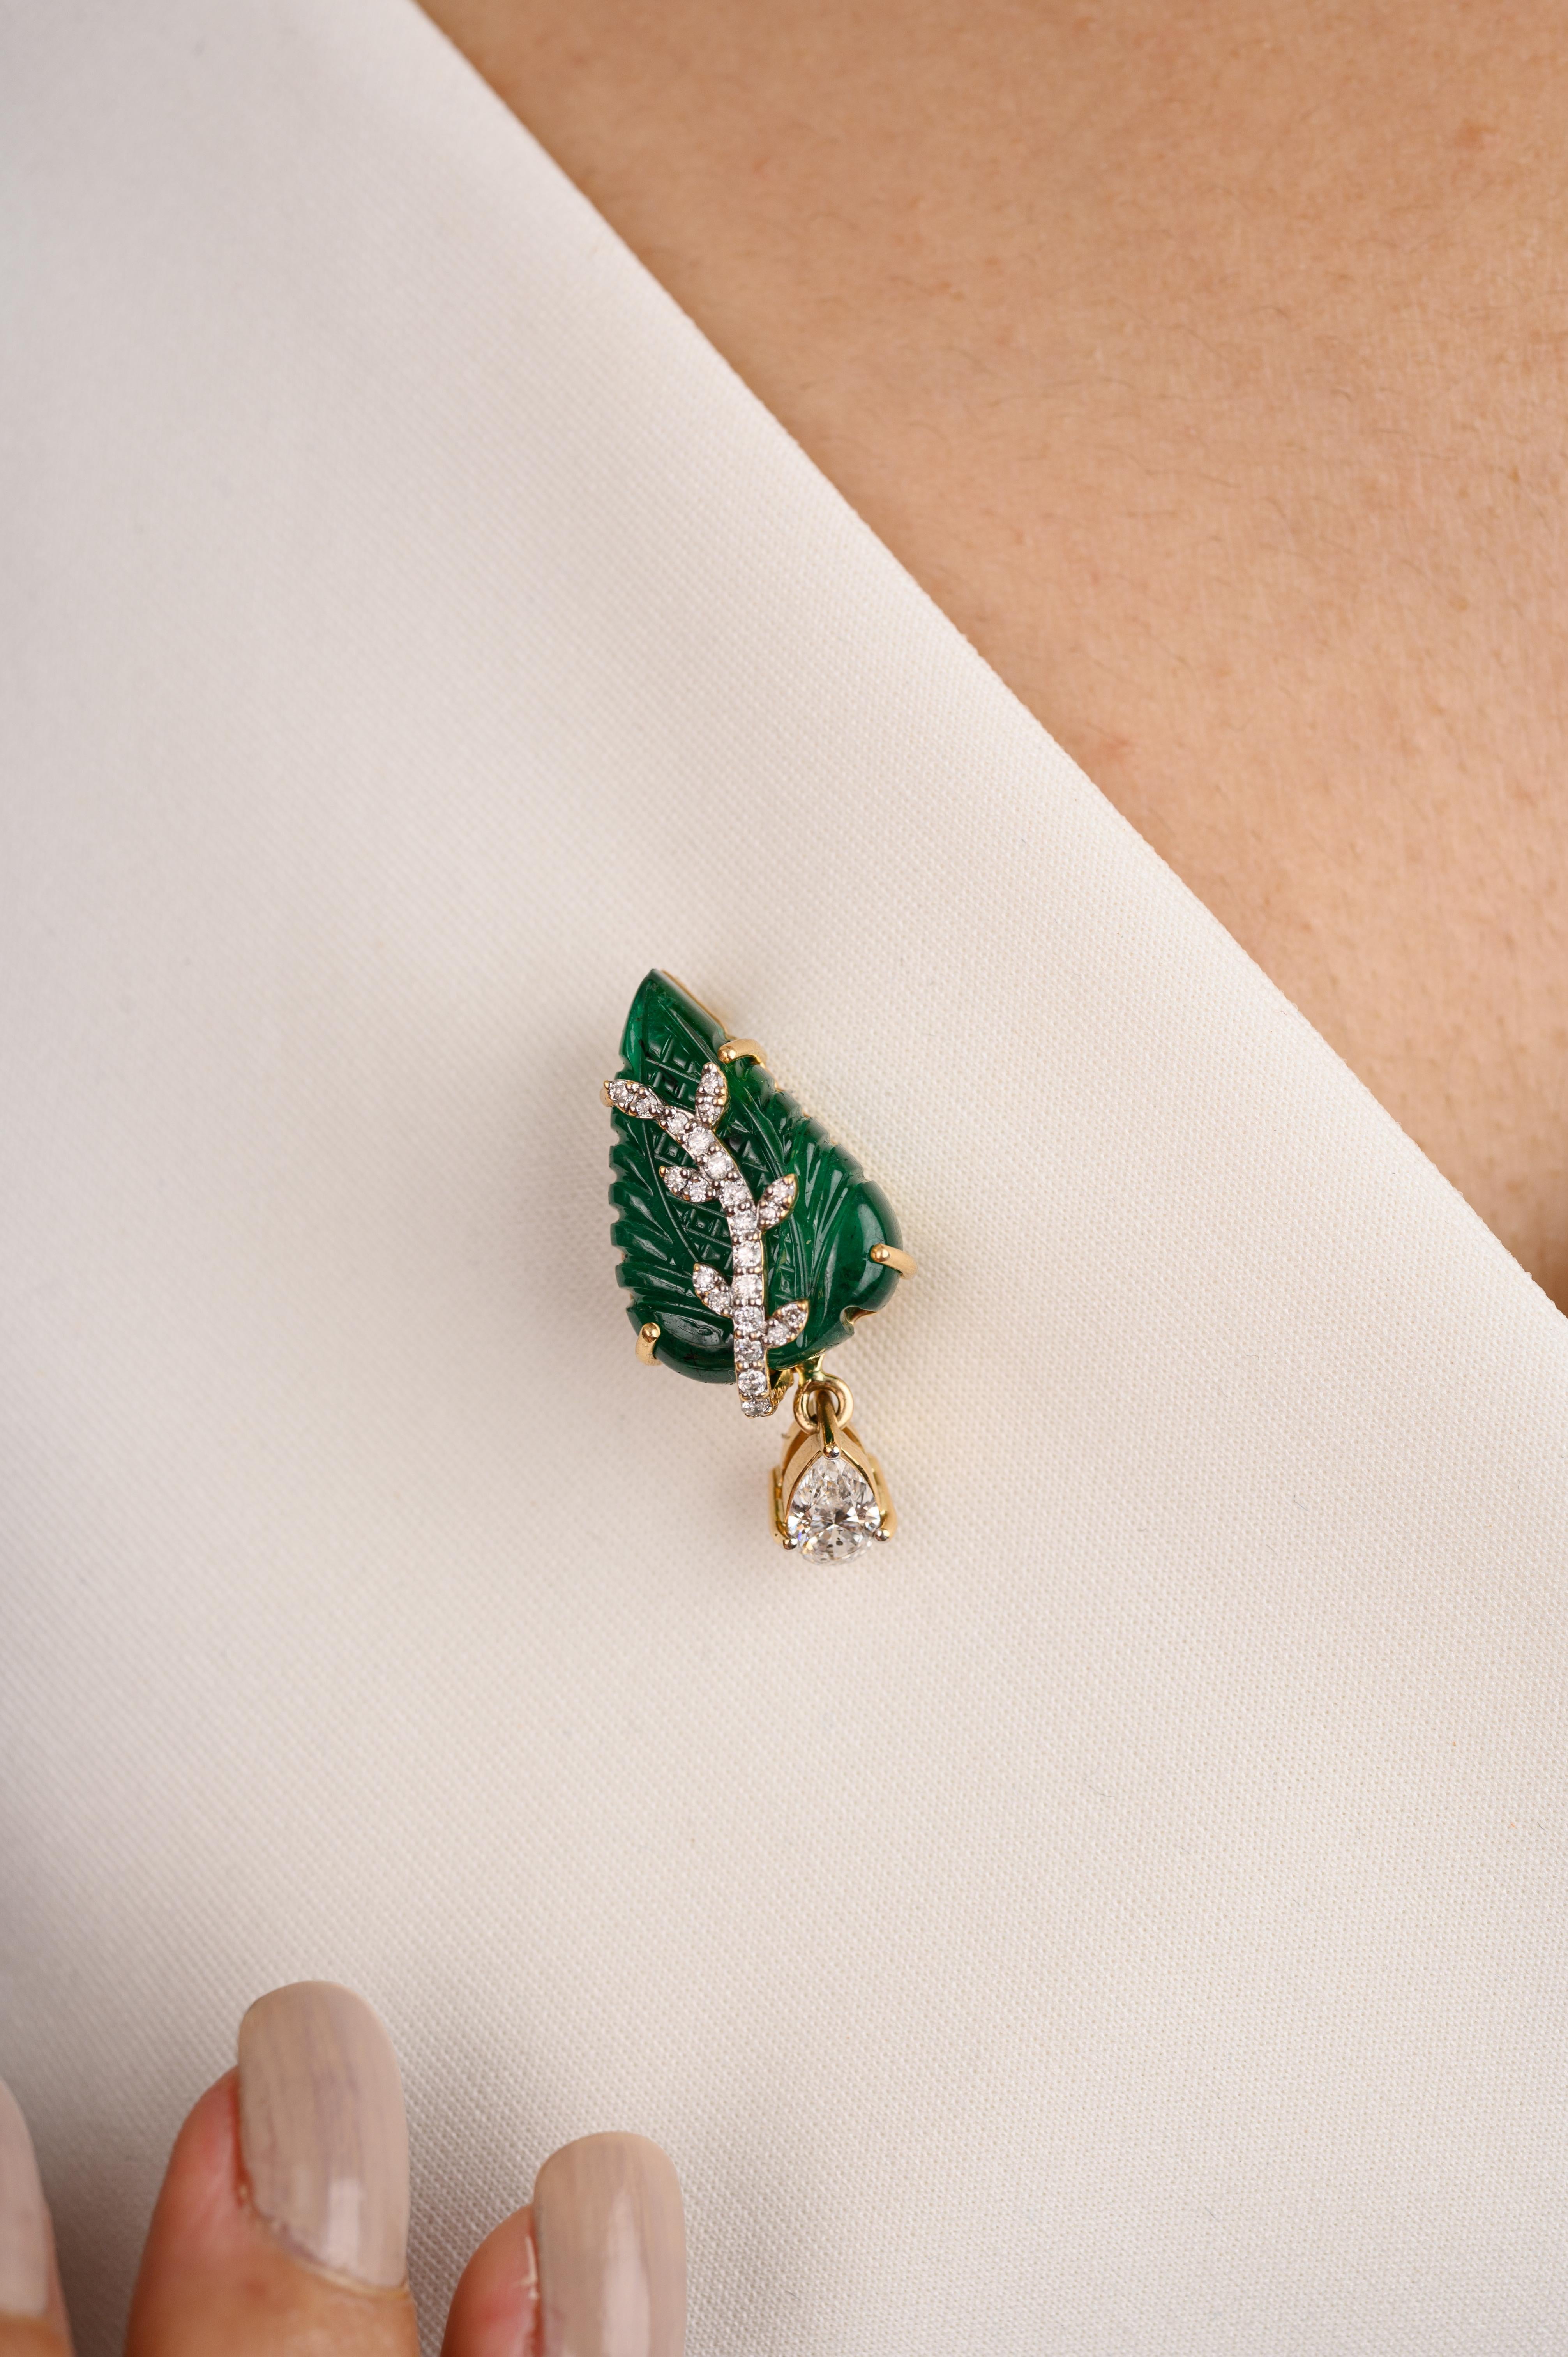 Unisex 9.99 Carat Carved Leaf Emerald Brooch with Diamonds Made in 18K Gold which is a fusion of surrealism and pop-art, designed to make a bold statement. Crafted with love and attention to detail, this features 9.99 carats of emerald which makes